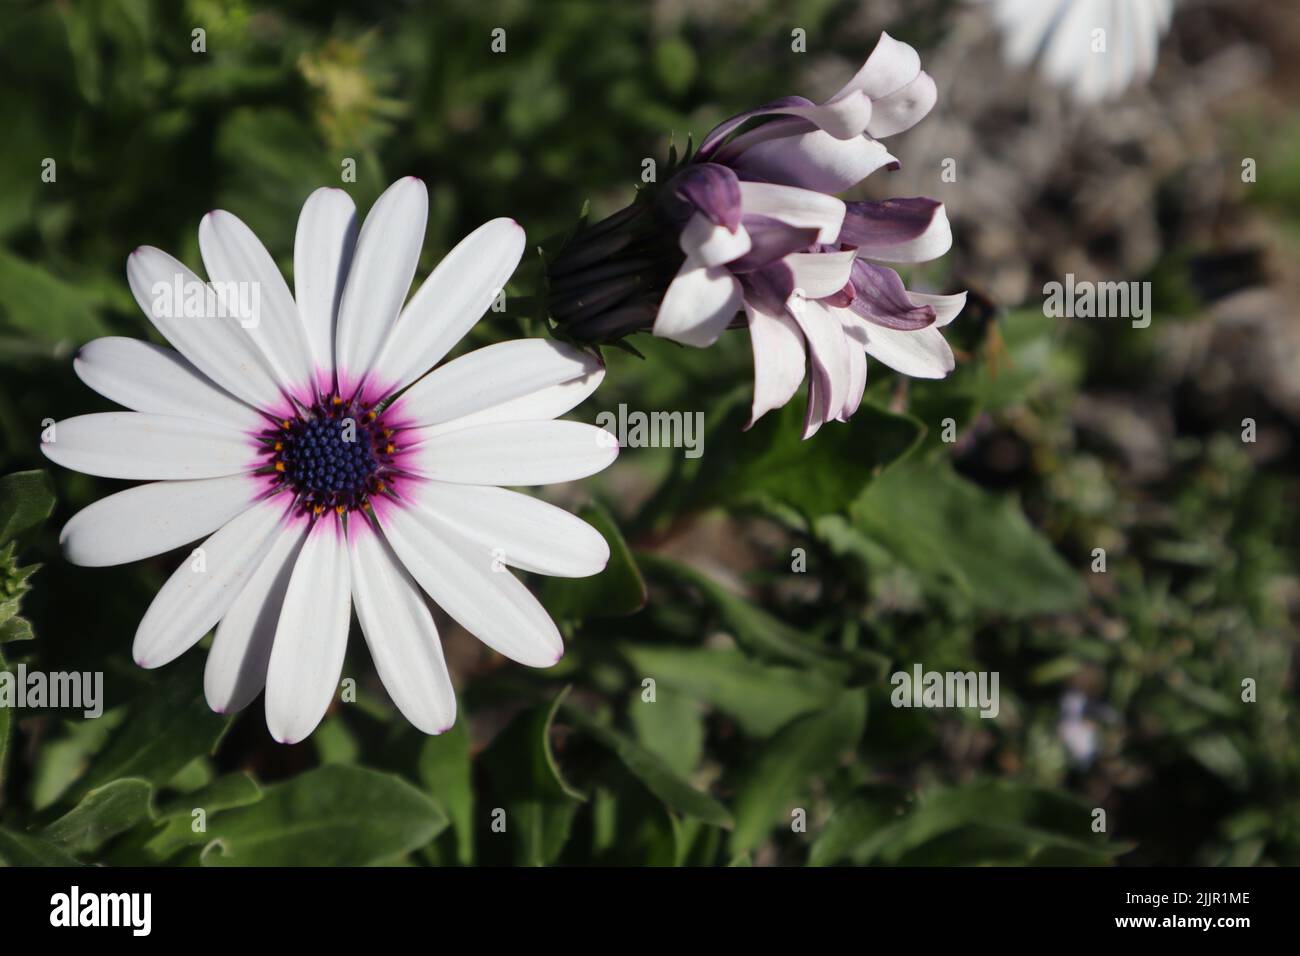 The Dimorphotheca flowers on a sunny day Stock Photo